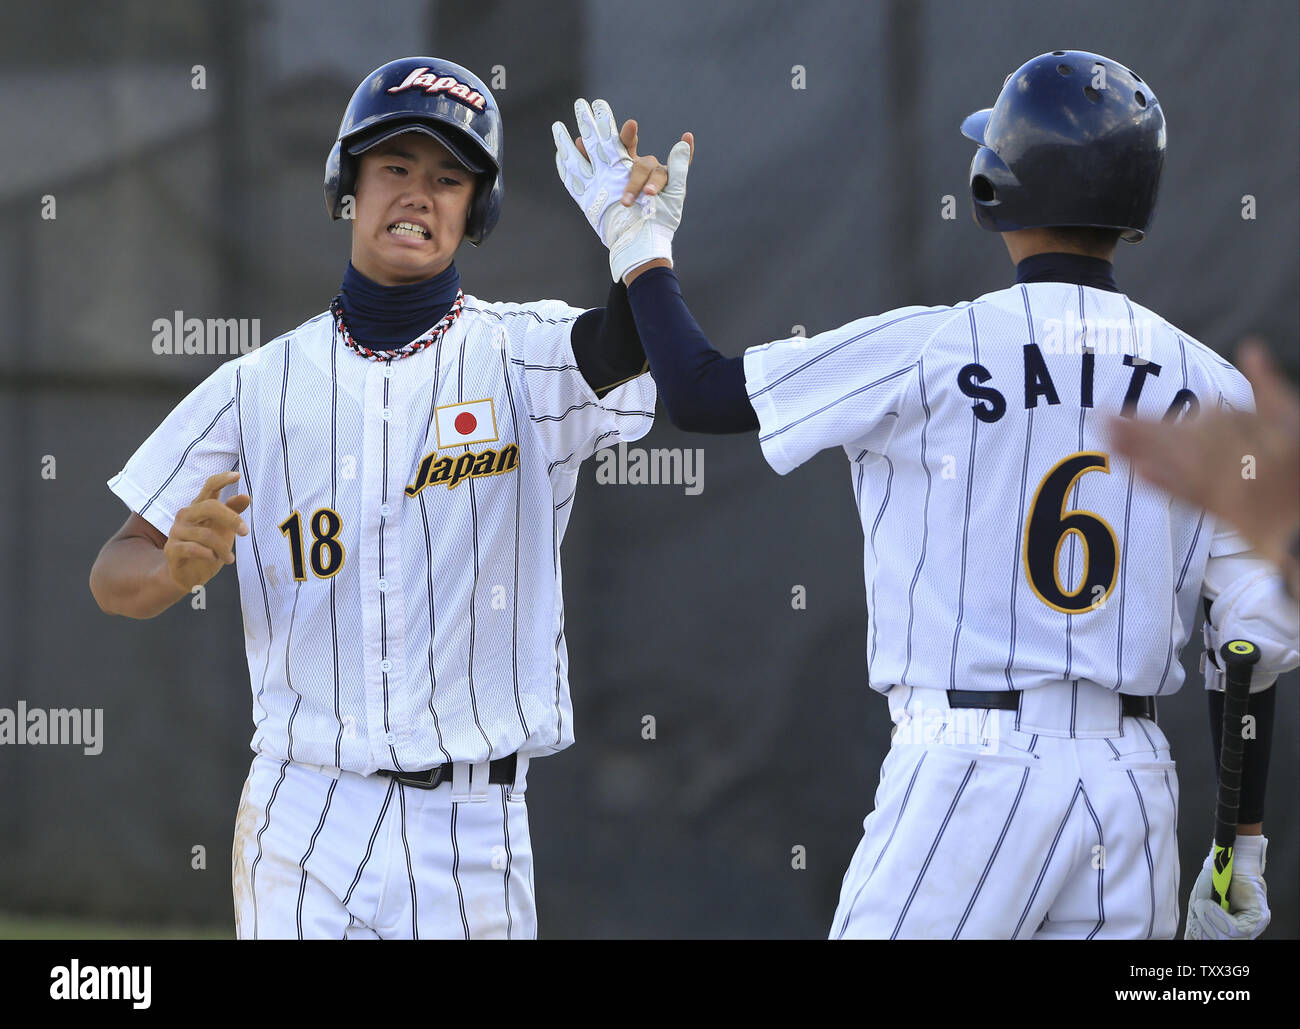 (L-R) Japan's Riku Kawahara high fives Reiji Saito after scoring on a wild pitch during the second inning of the first game of the McHenry County Youth Sports Association's 23rd annual 15-Year-Old International Championship on August 1, 2015 in Crystal Lake, Illinois.  Japan lost to Los Lomas Potros 6-4 in their first game but defeated them 3-2 in their second game to win the championship.. Photo by John Konstantaras/UPI Stock Photo